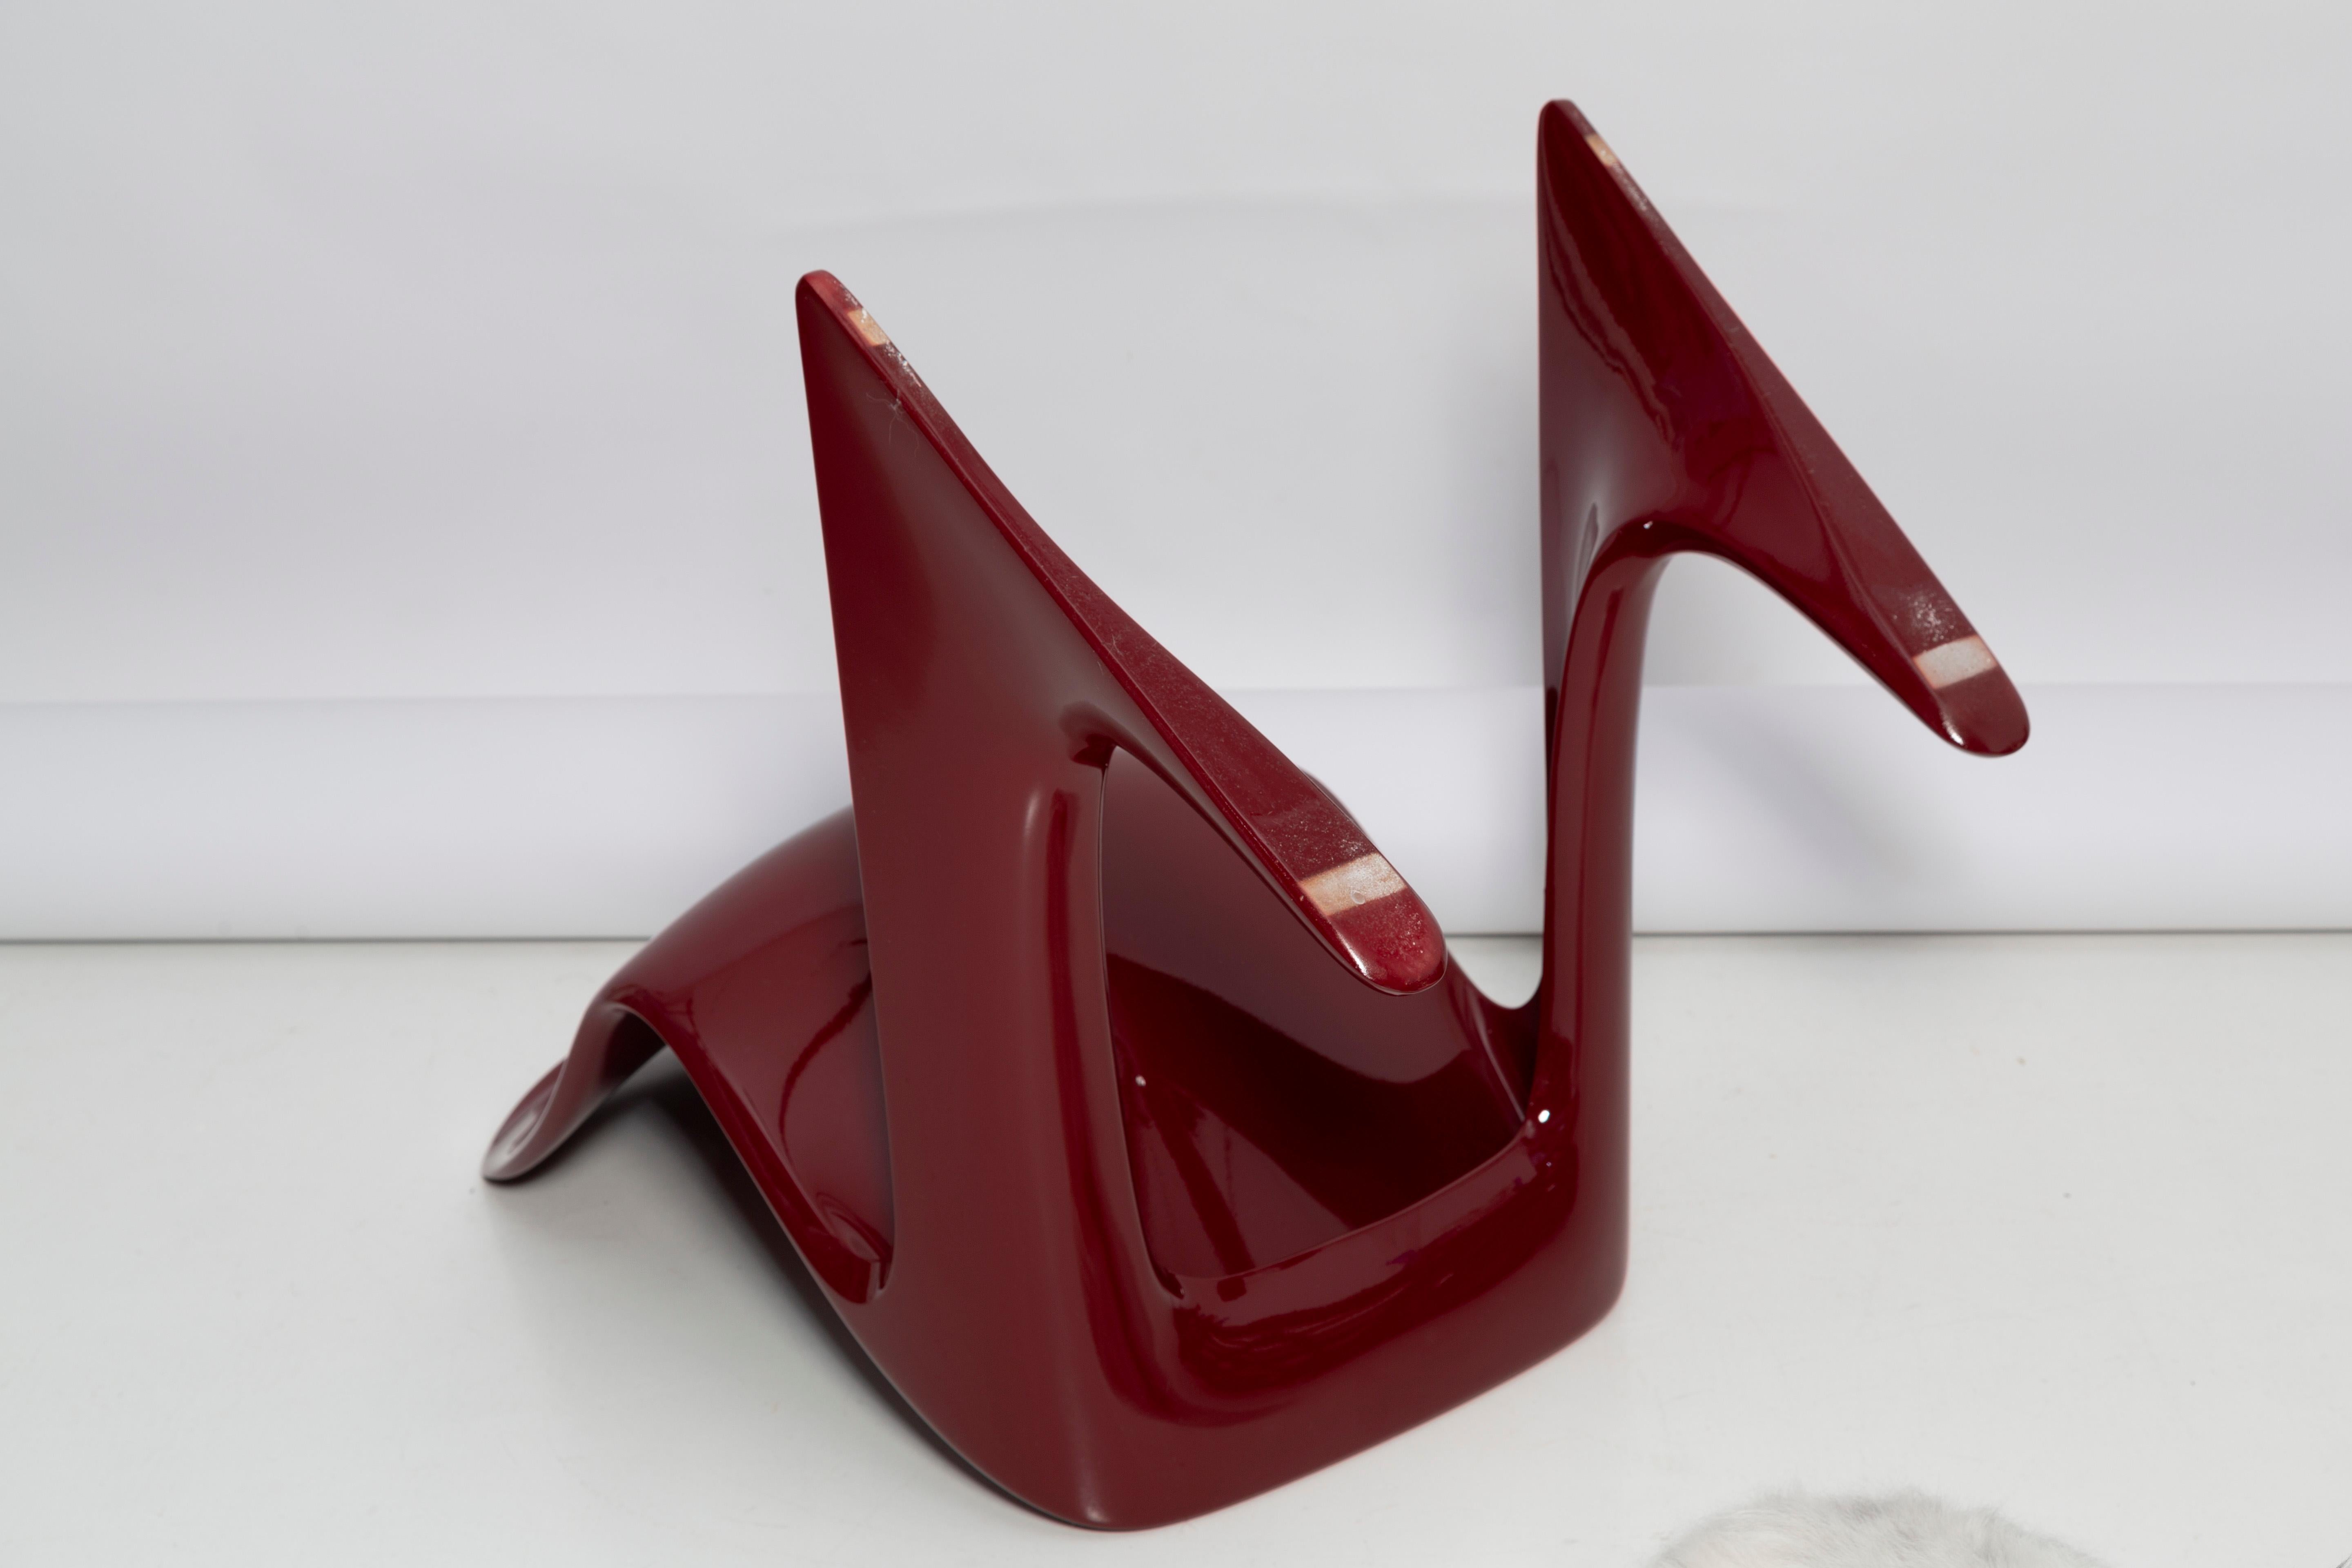 Pair of Dark Red Wine Kangaroo Chairs Designed by Ernst Moeckl, Germany, 1968 For Sale 2